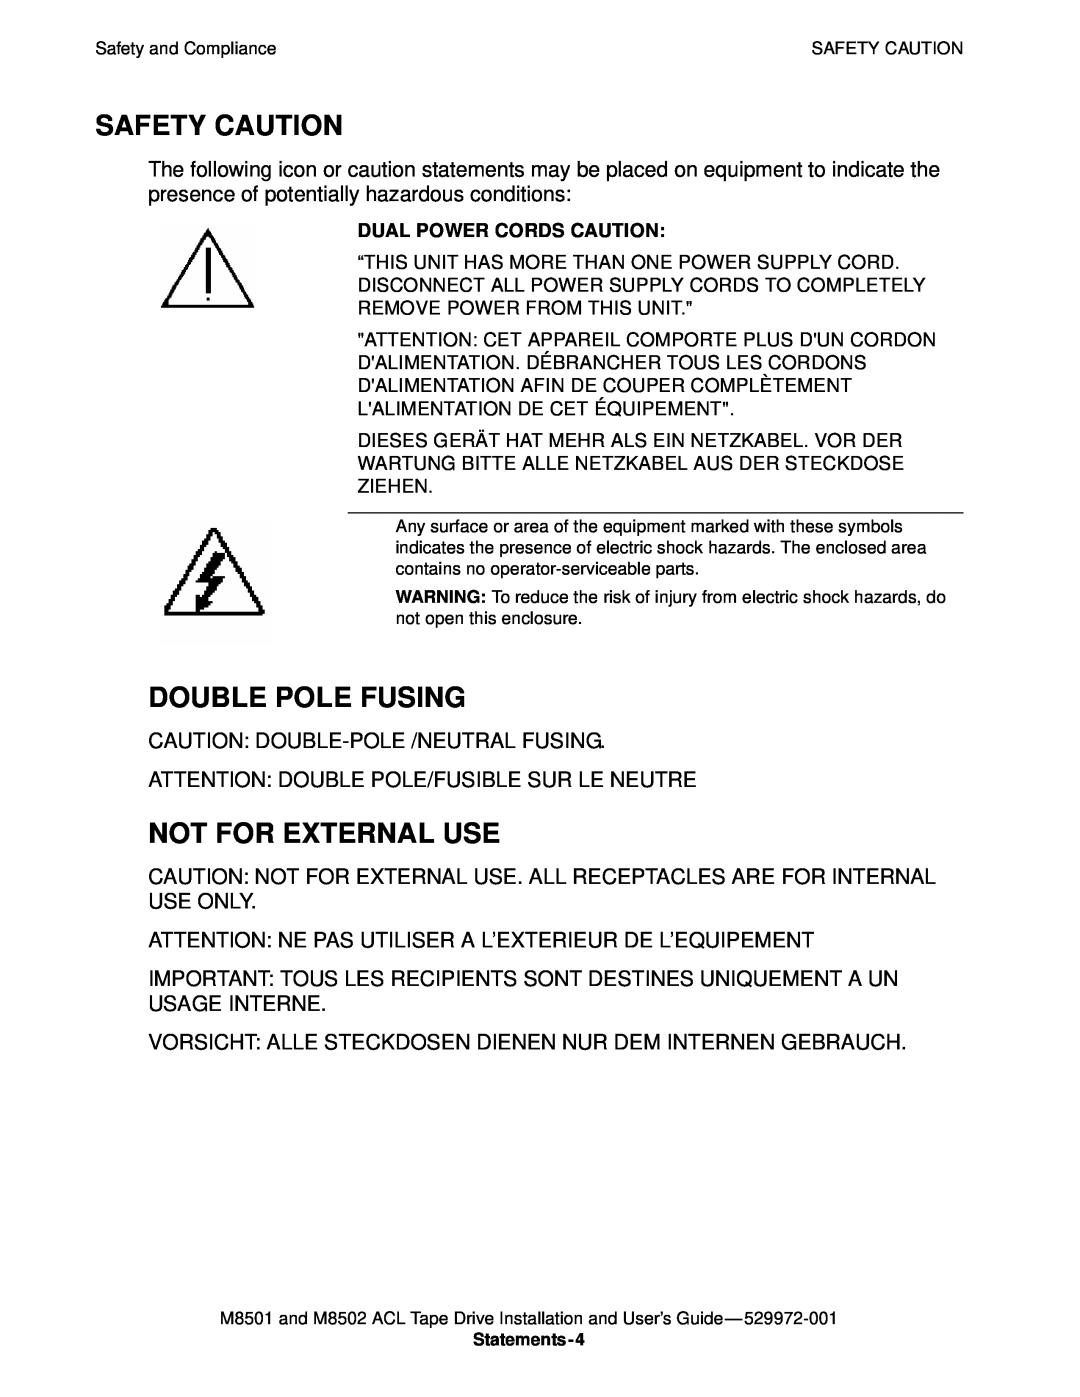 SMC Networks M8501 manual Safety Caution, Double Pole Fusing, Not For External Use 